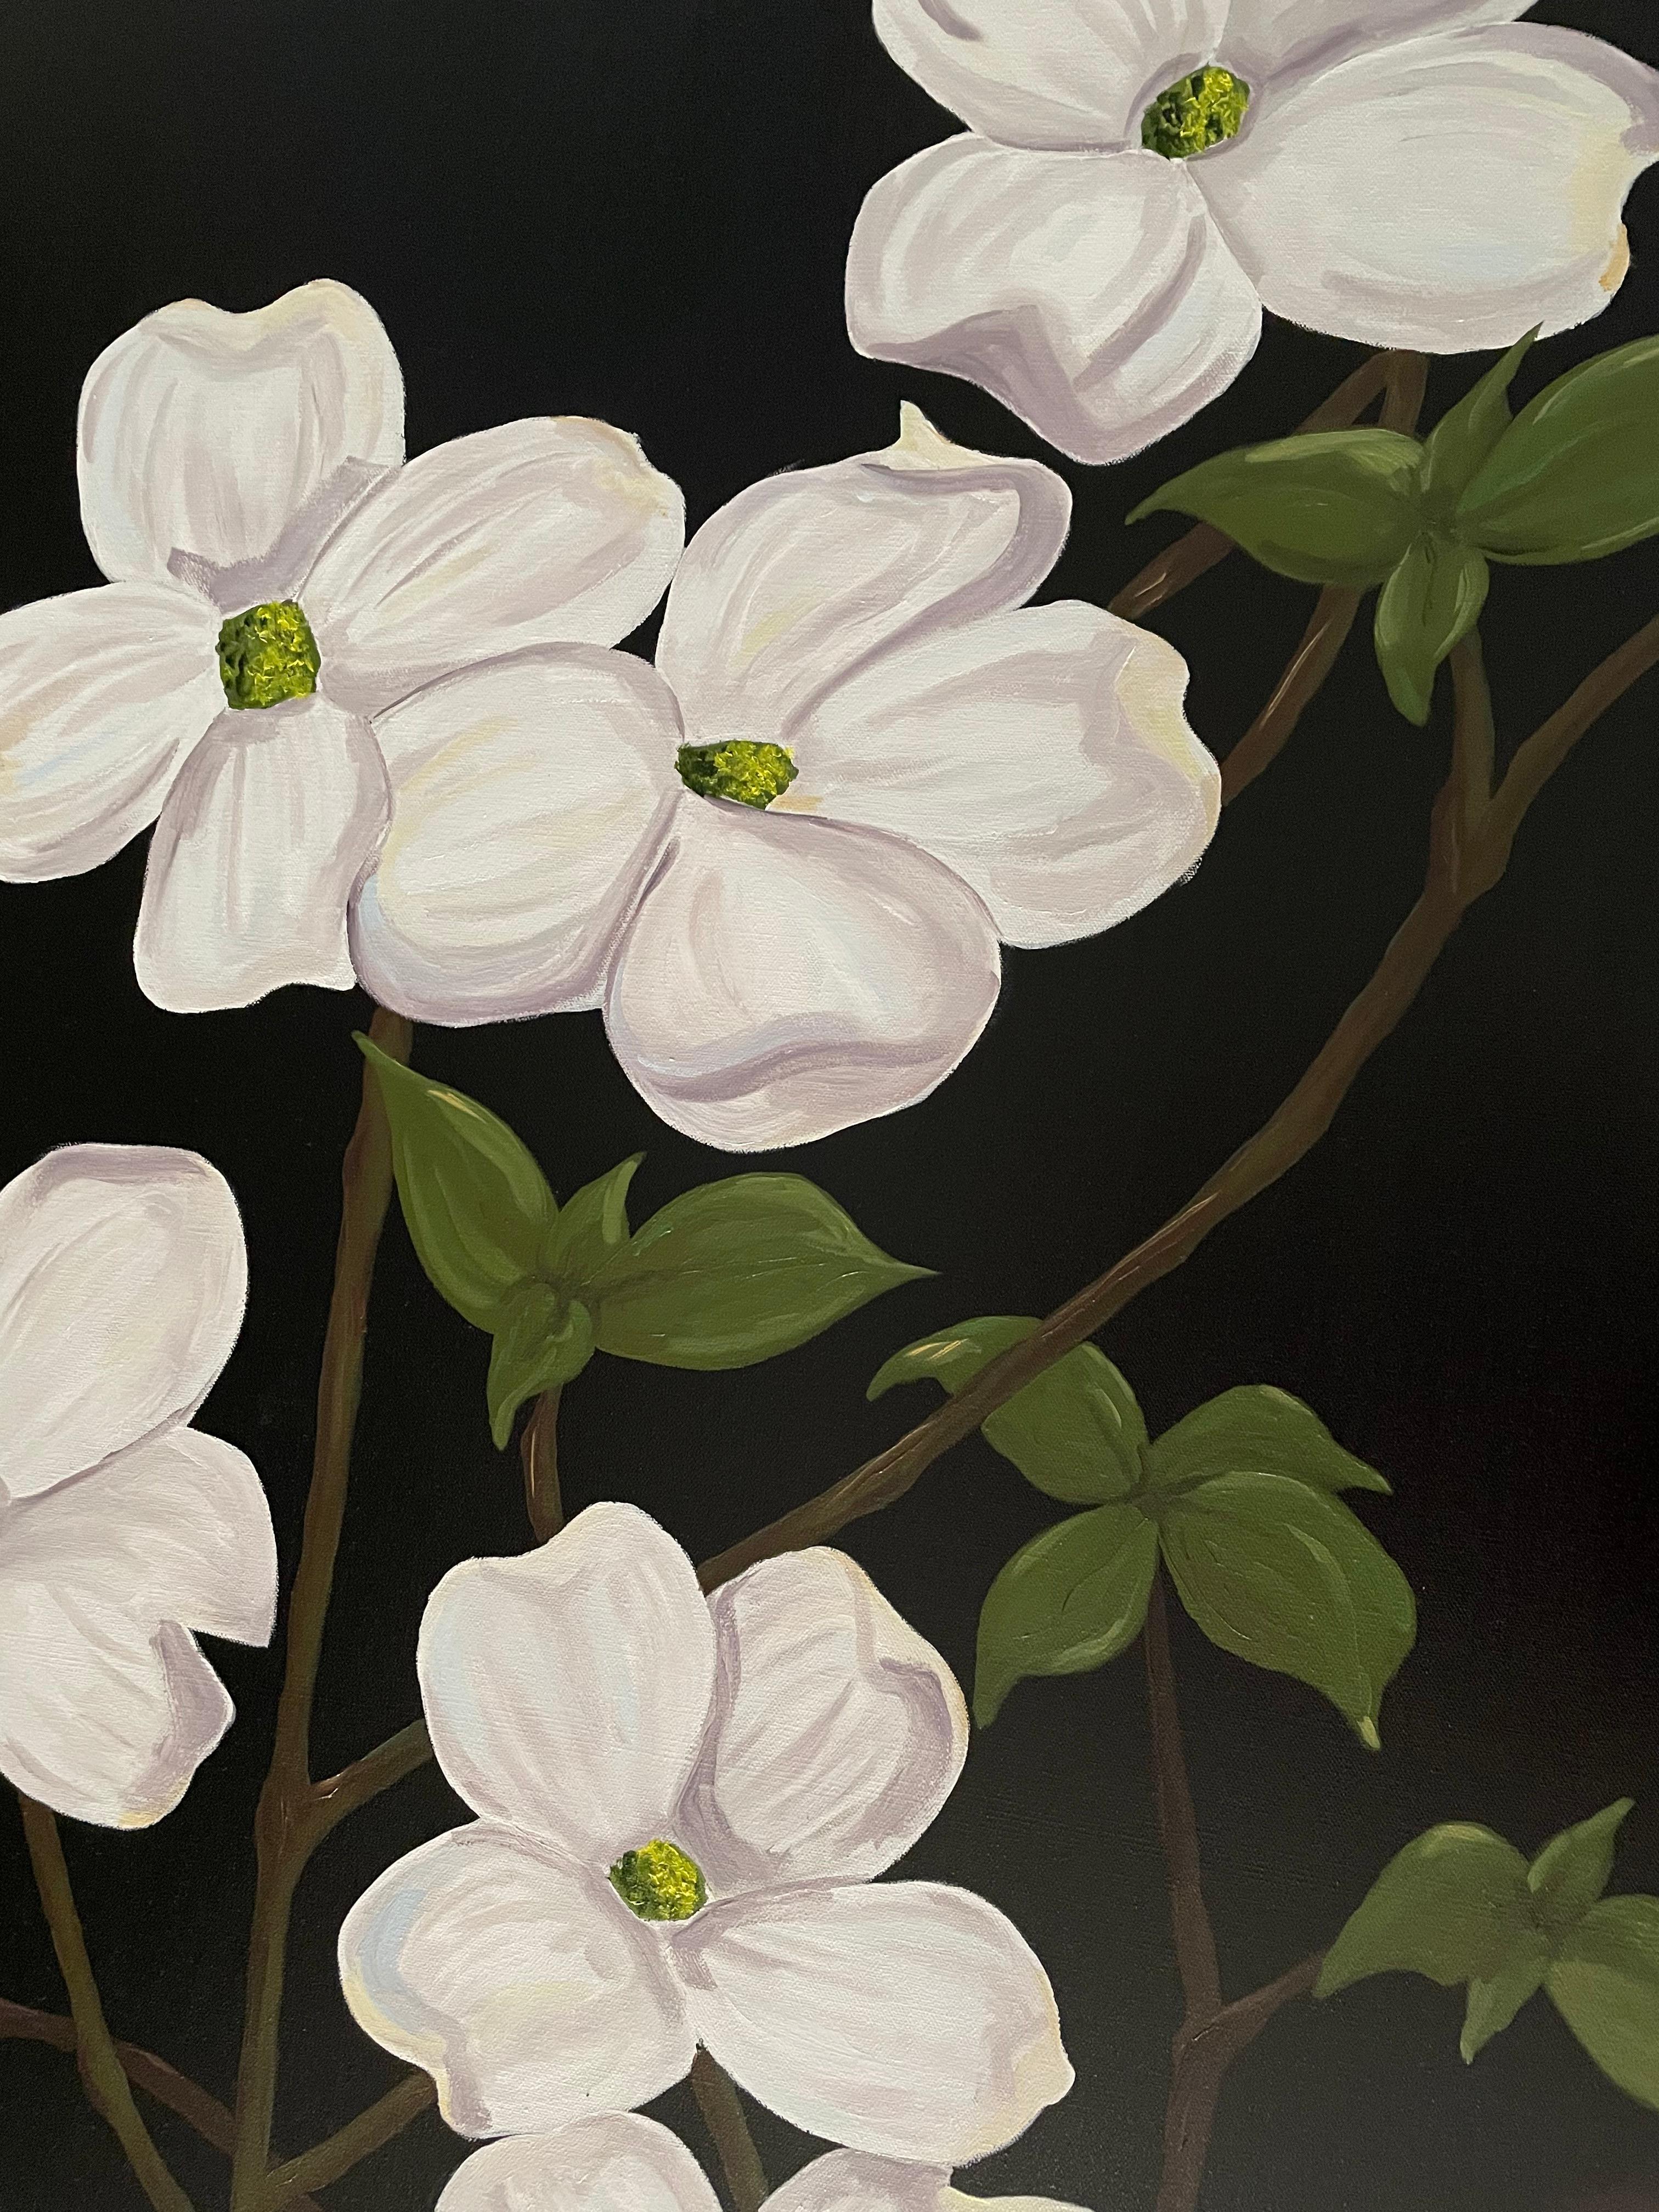 From the artist's recent flower series. Wild dogwood with white flowers and green leaves on branches boldly set against a black background. Oil on canvas painted by American realist Ken Miller. Suitable for display in a home interior, recreation